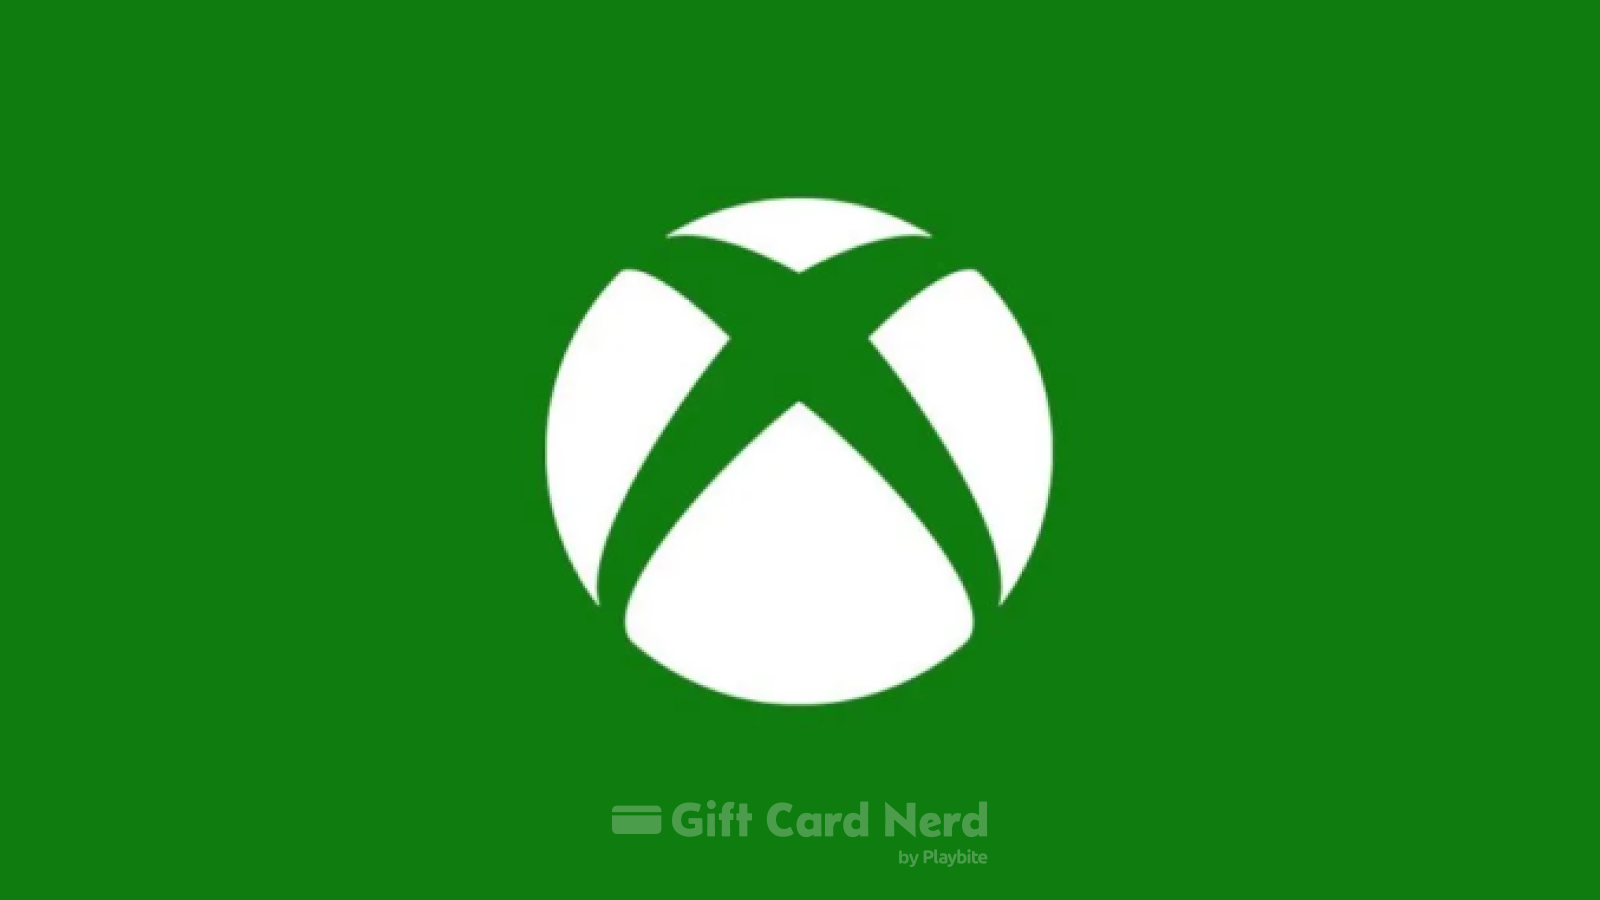 How to Check Your Xbox Gift Card Balance